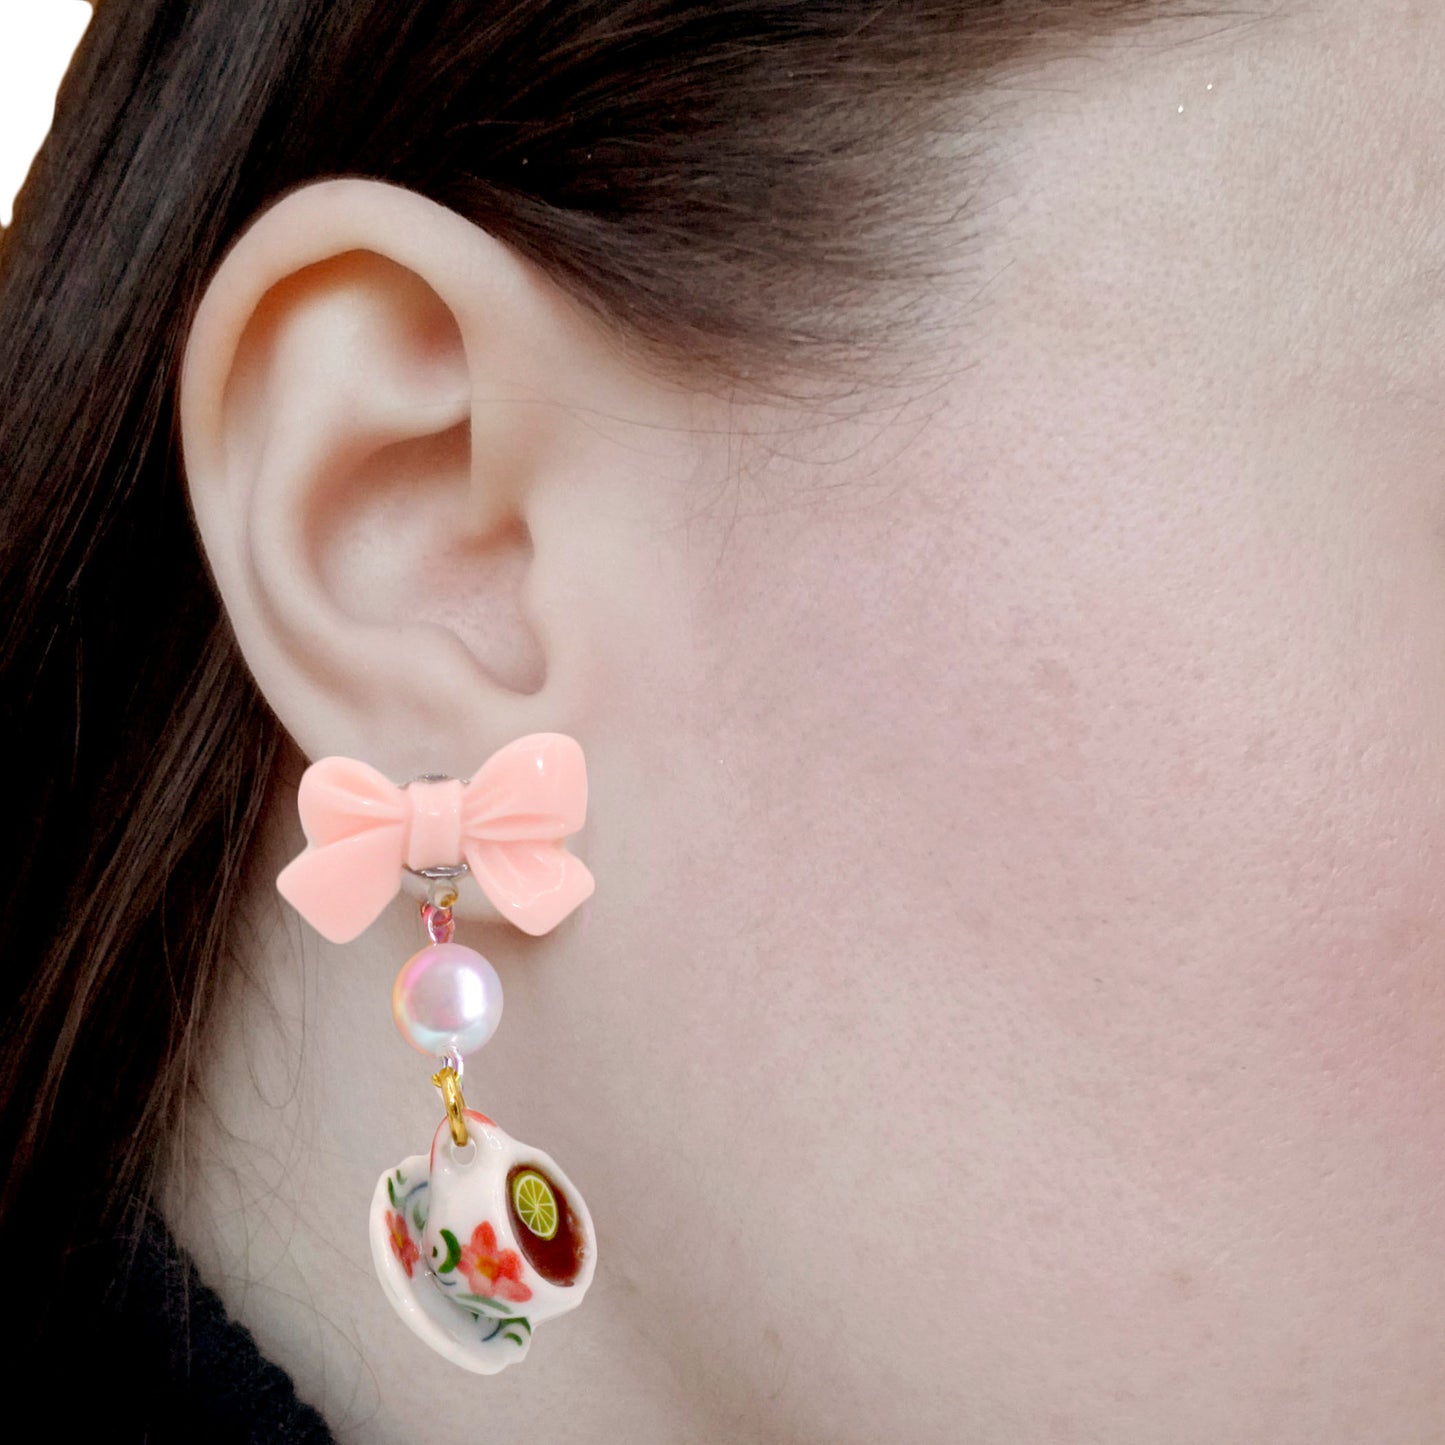 Pink Victorian Tiny Tea Cup Bow & Pearl Earrings, Hypoallergenic Steel - High Tea Collection - Fatally Feminine Designs